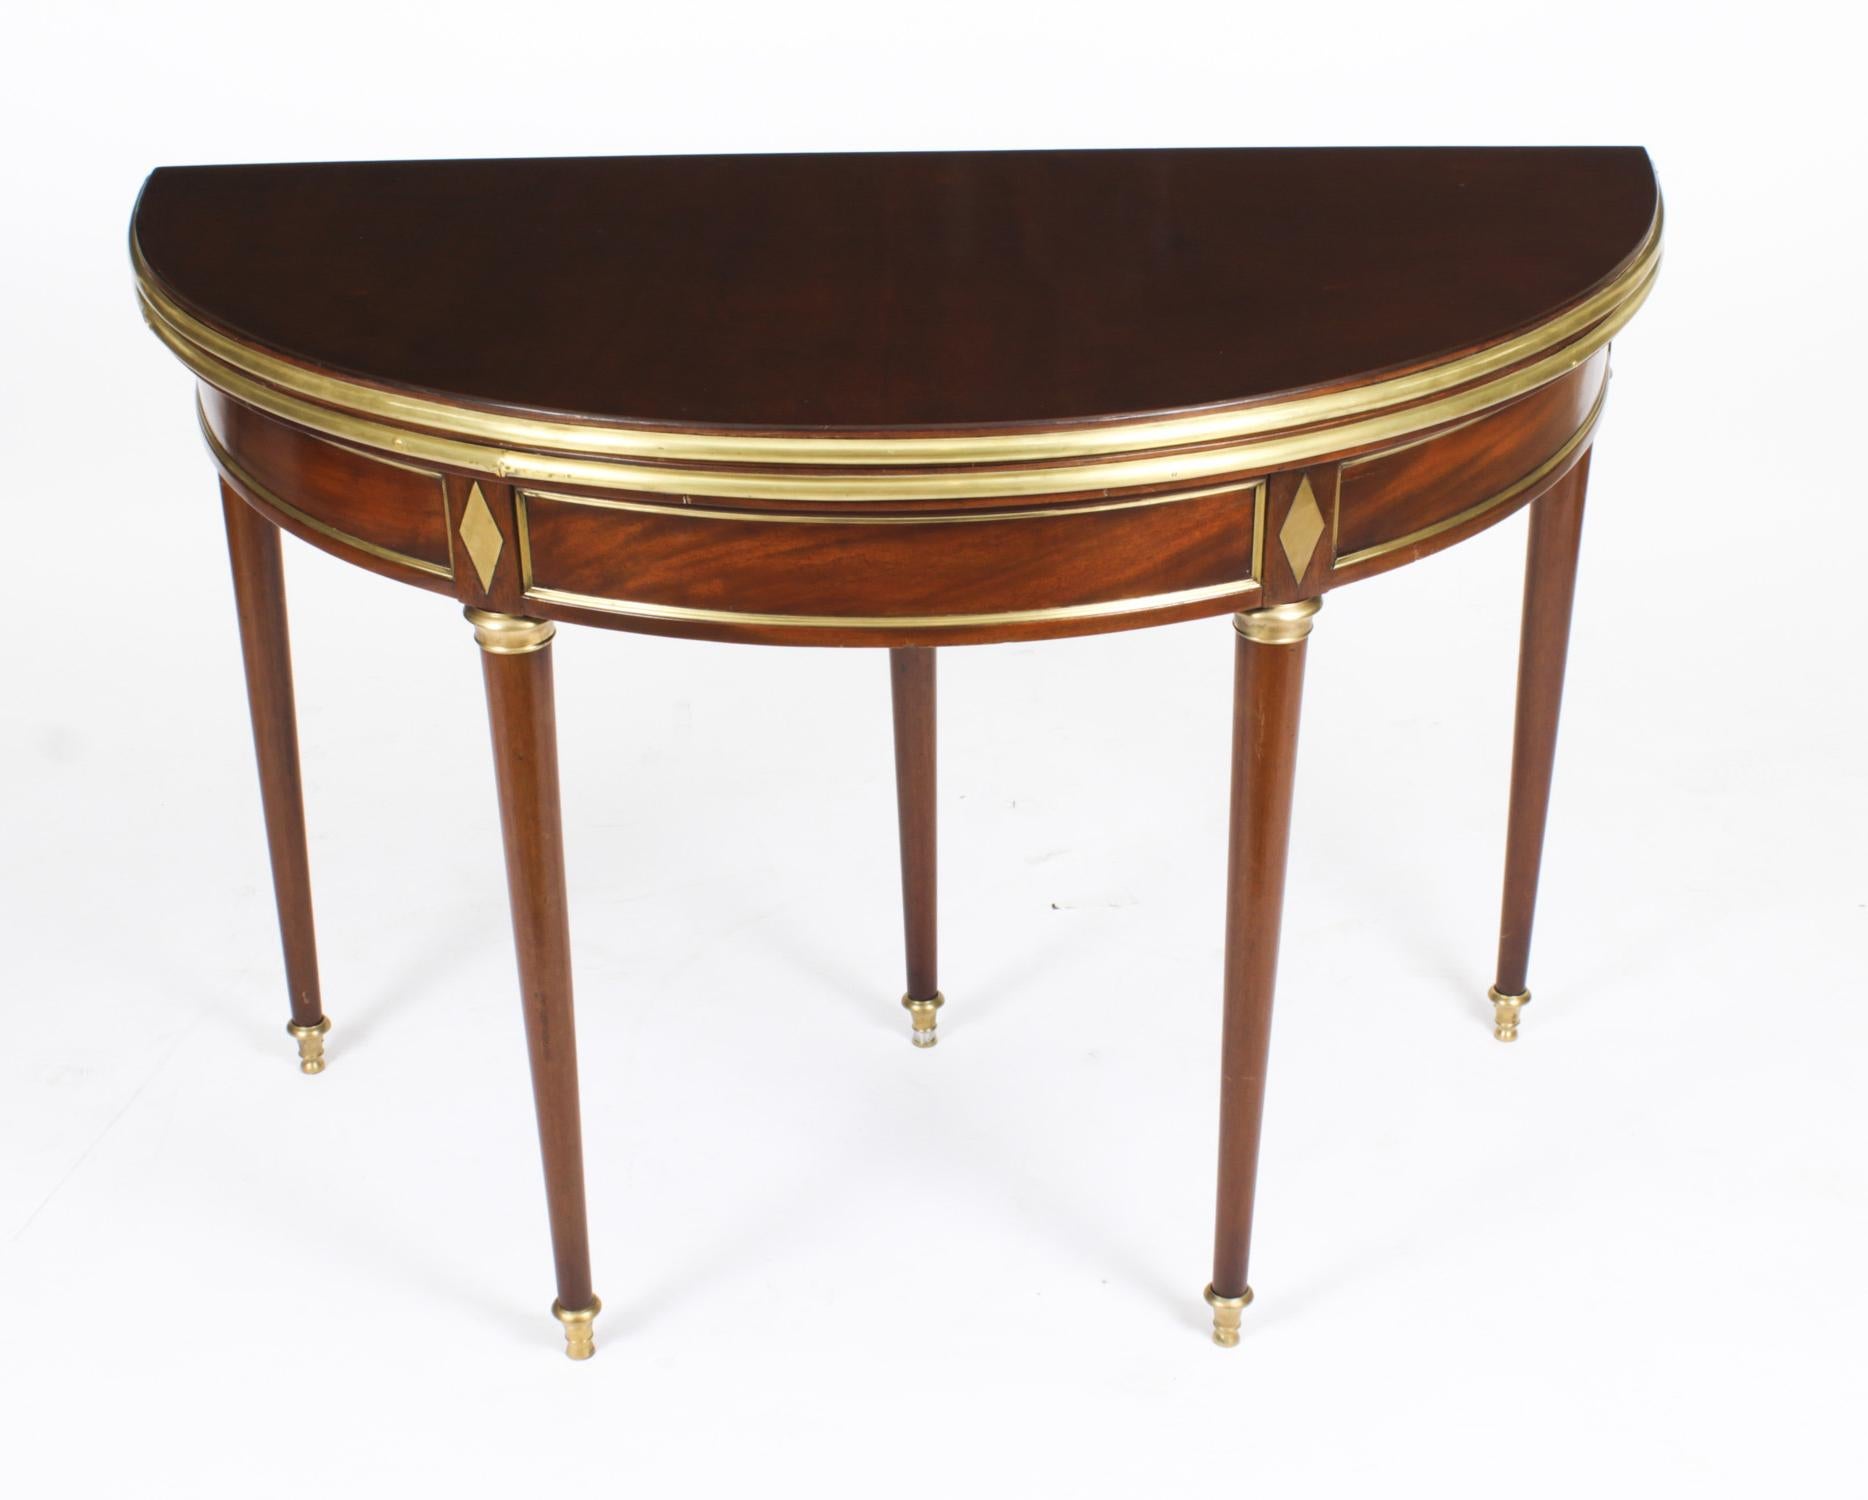 This is a very attractive antique French Directoire flame mahogany and brass mounted demi-lune ganes table, circa 1820 in date.
 
THE BOTANICAL NAME FOR THE MAHOGANY THAT THIS CARD TABLE IS MADE OF IS SWIETENIA MACROPHYLLA AND THIS TYPE OF MAHOGANY